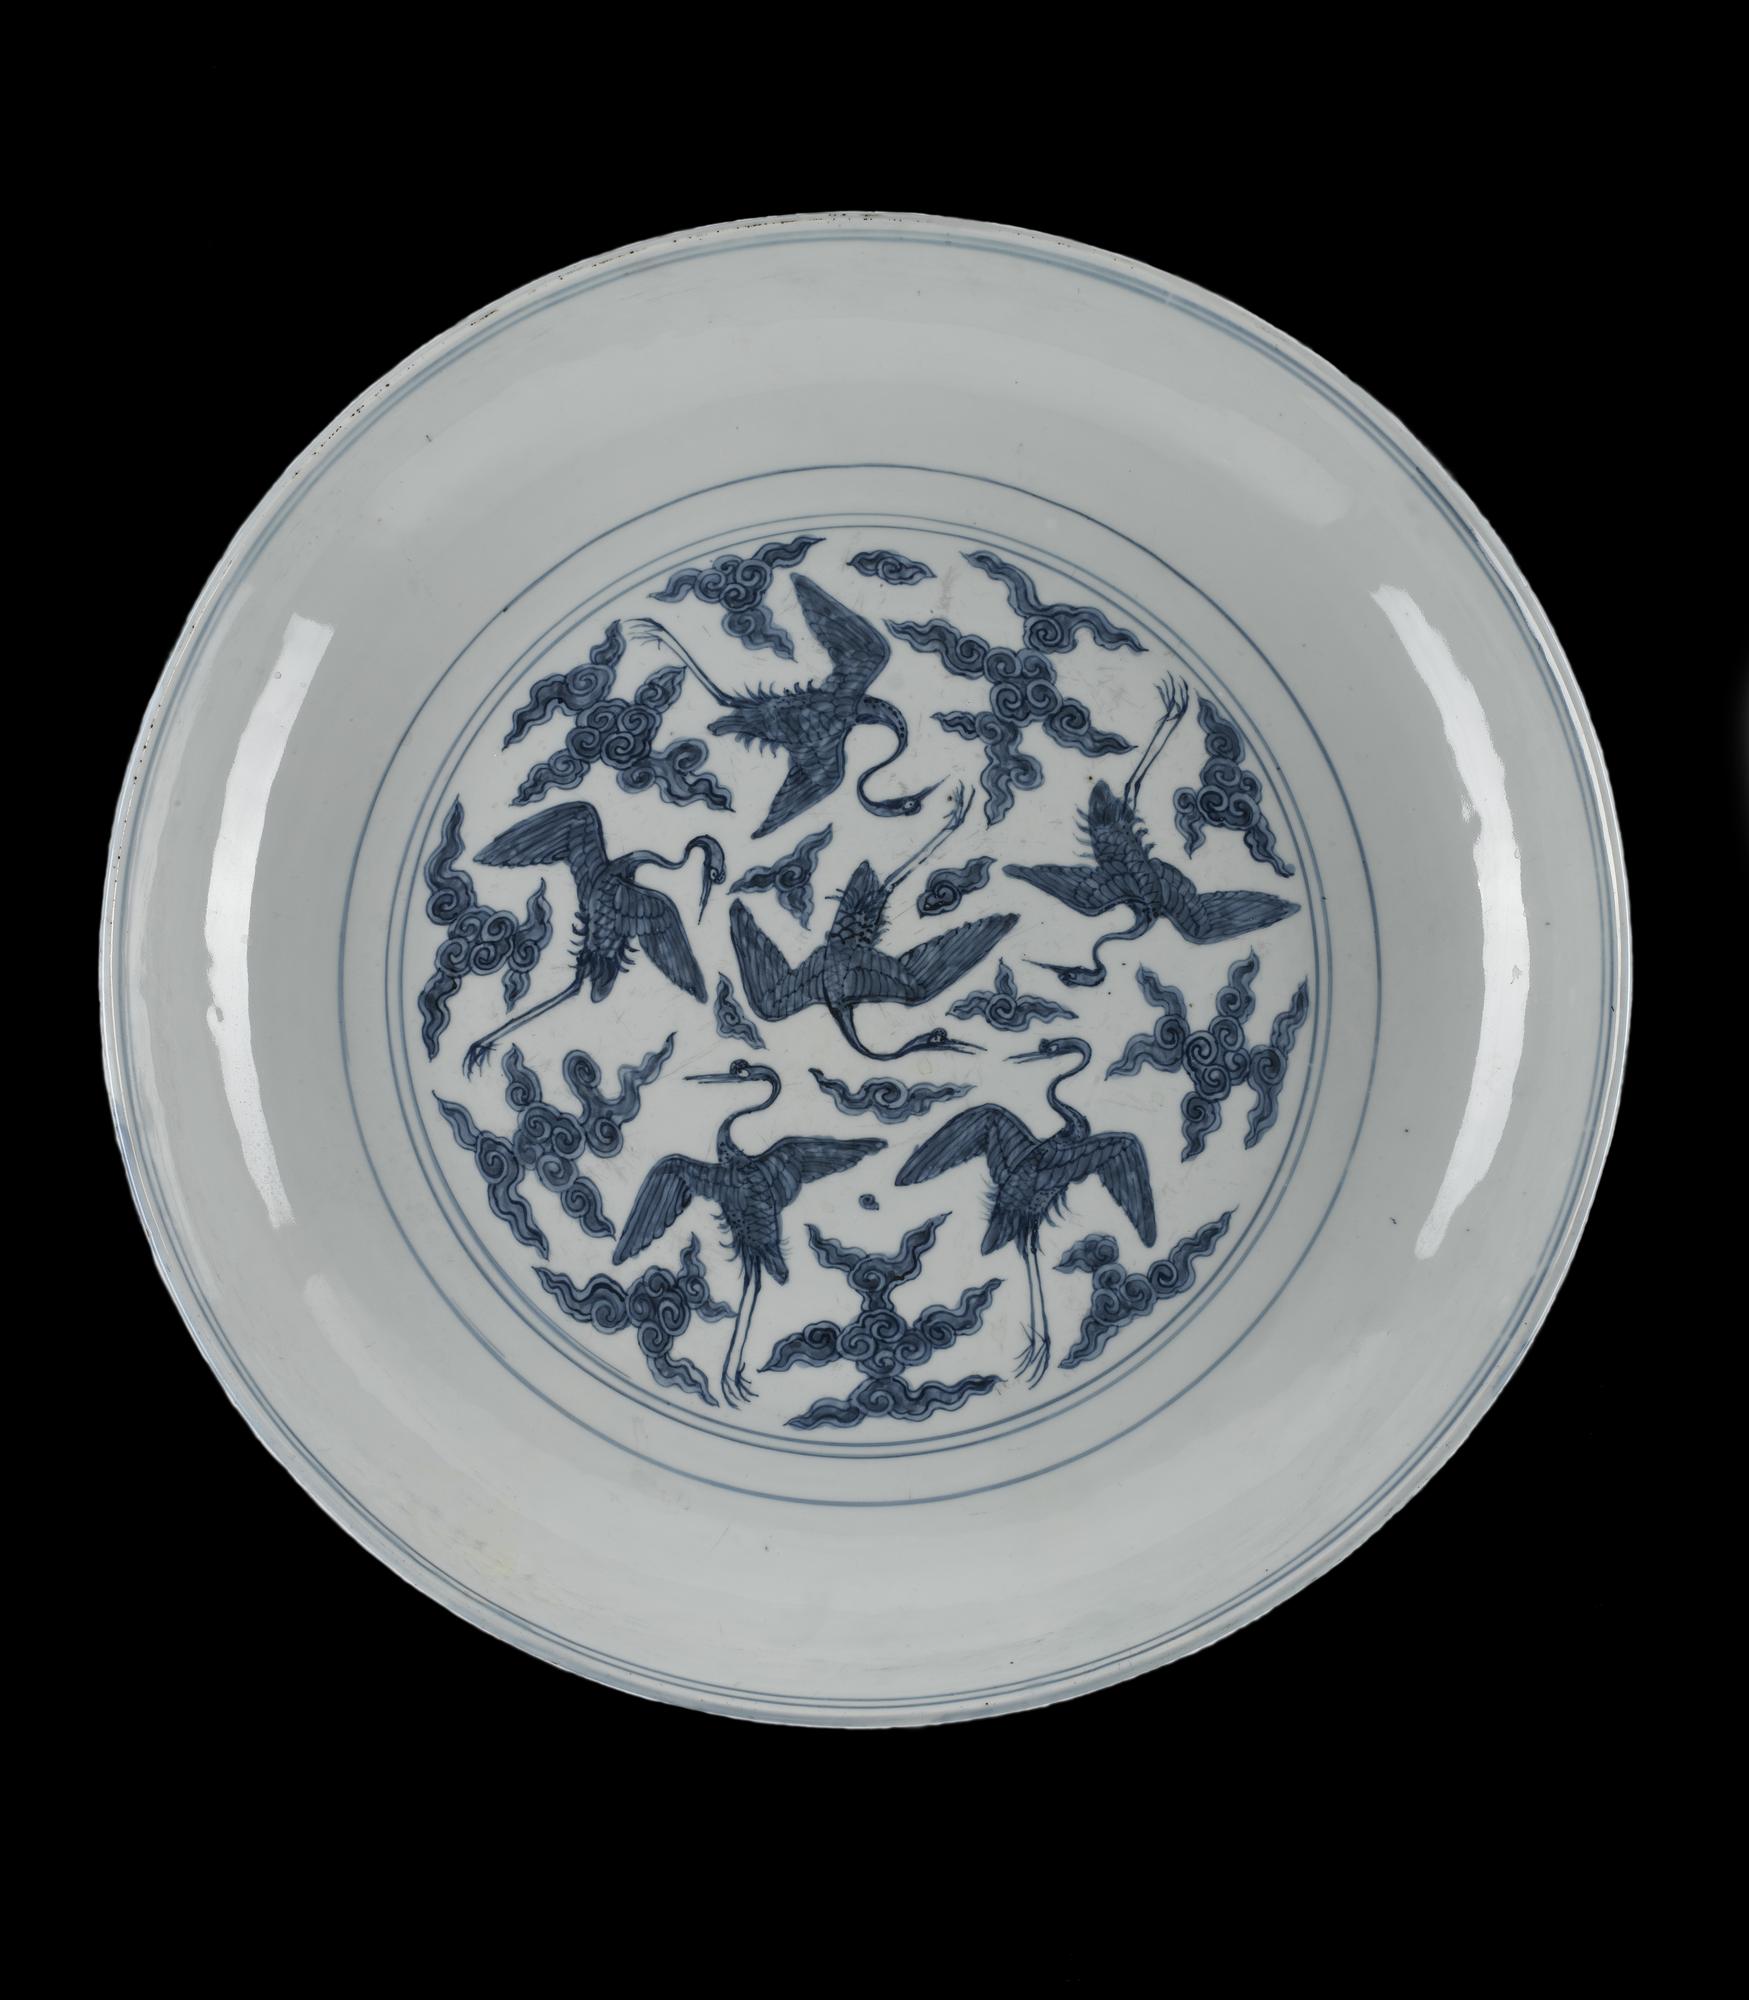 Circular porcelain dish decorated in underglaze blue with a design of cranes flying among cloud scrolls: Chinese, Ming dynasty, Jiajing reign, 1522-1566.